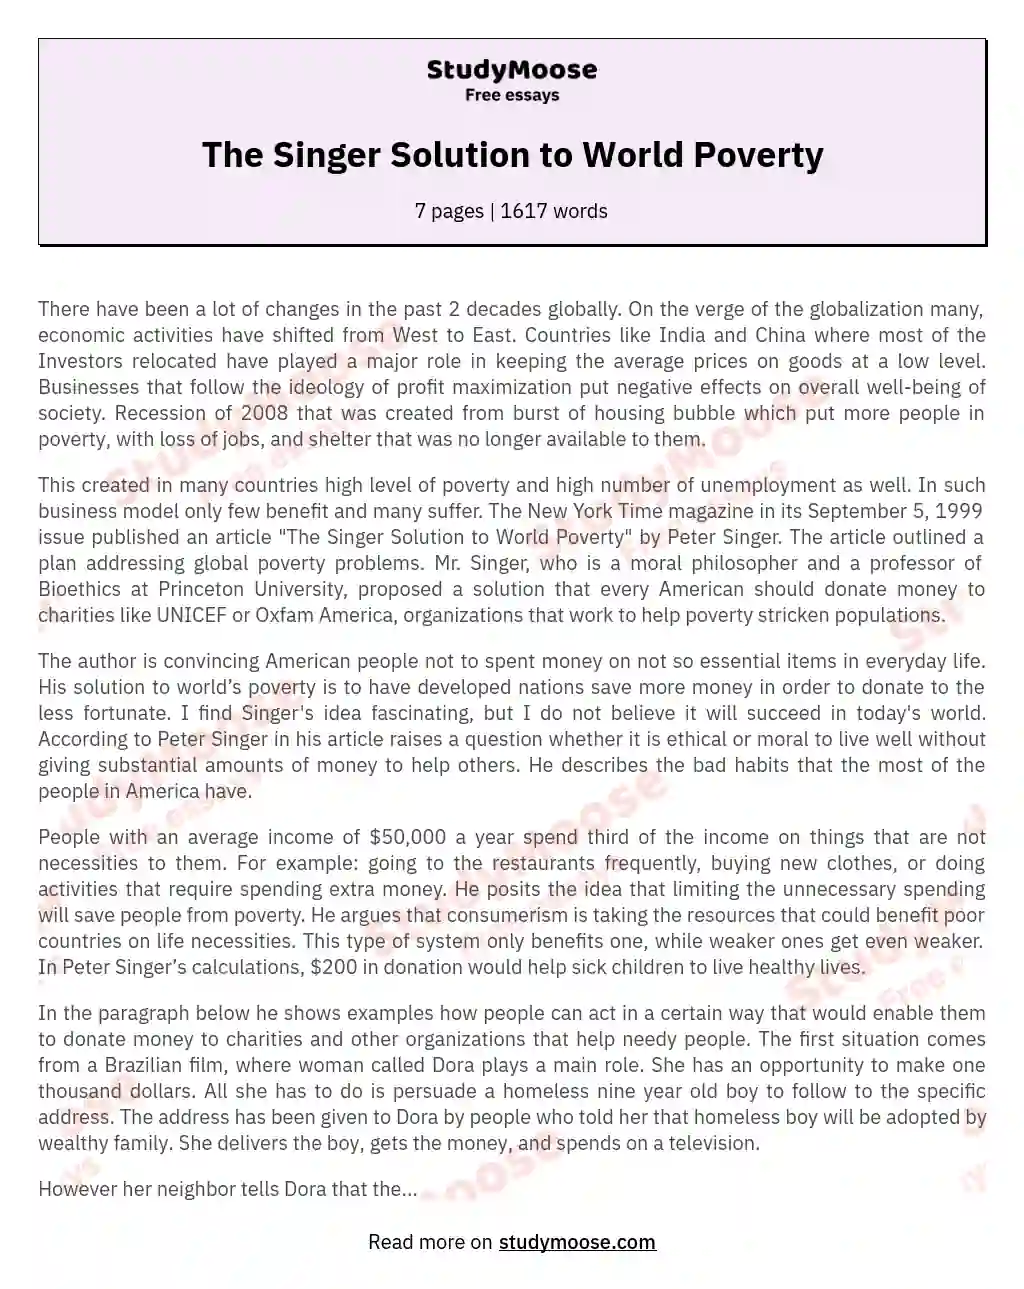 The Singer Solution to World Poverty